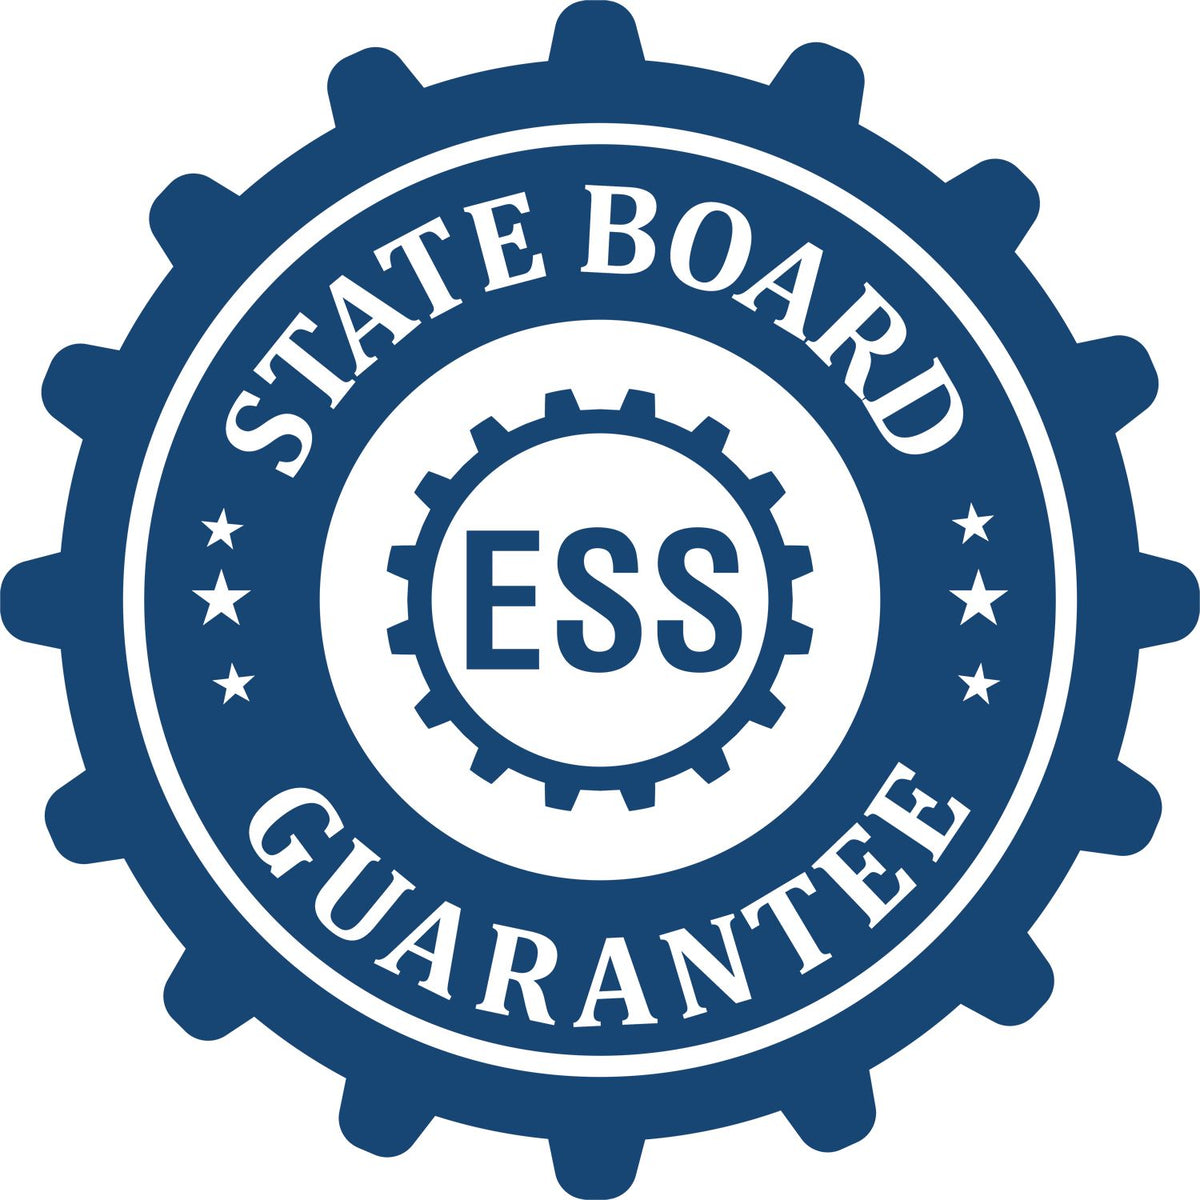 An emblem in a gear shape illustrating a state board guarantee for the State of Missouri Long Reach Architectural Embossing Seal product.